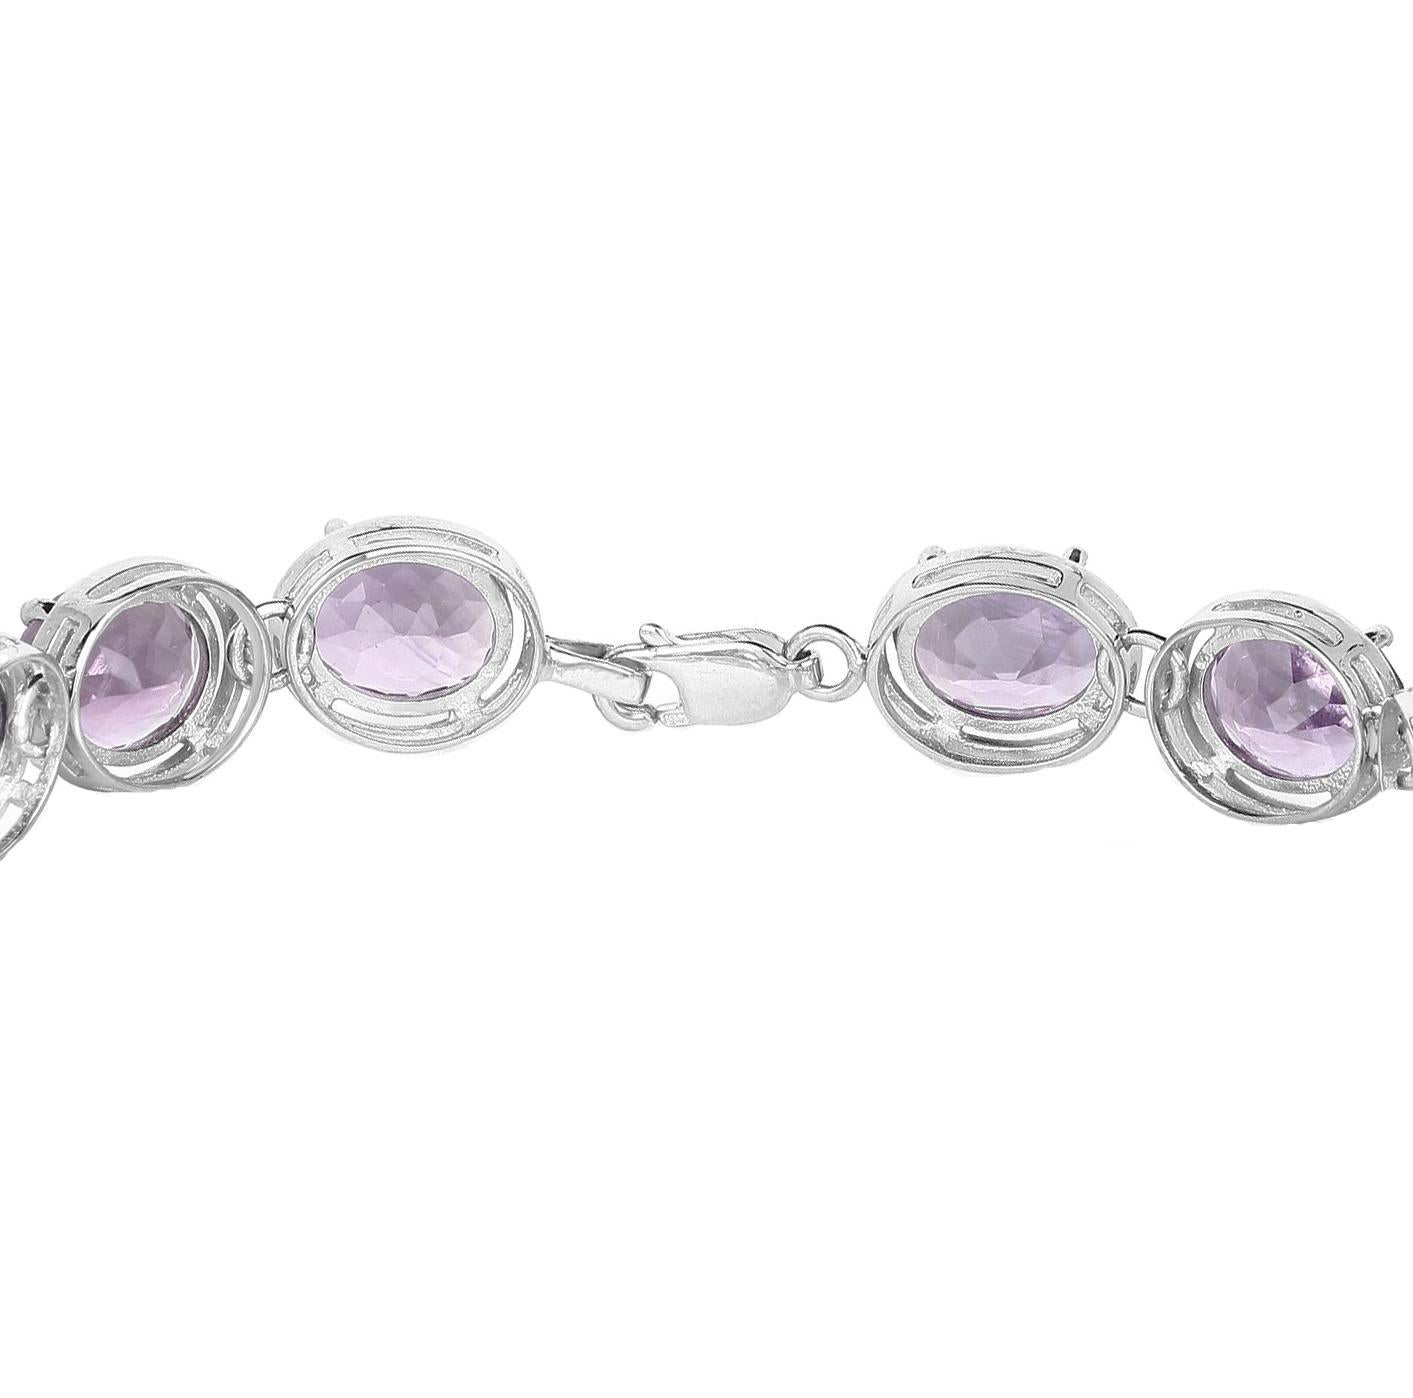 Natural Amethyst Bracelet 30 Carats Sterling Silver In New Condition For Sale In Laguna Niguel, CA